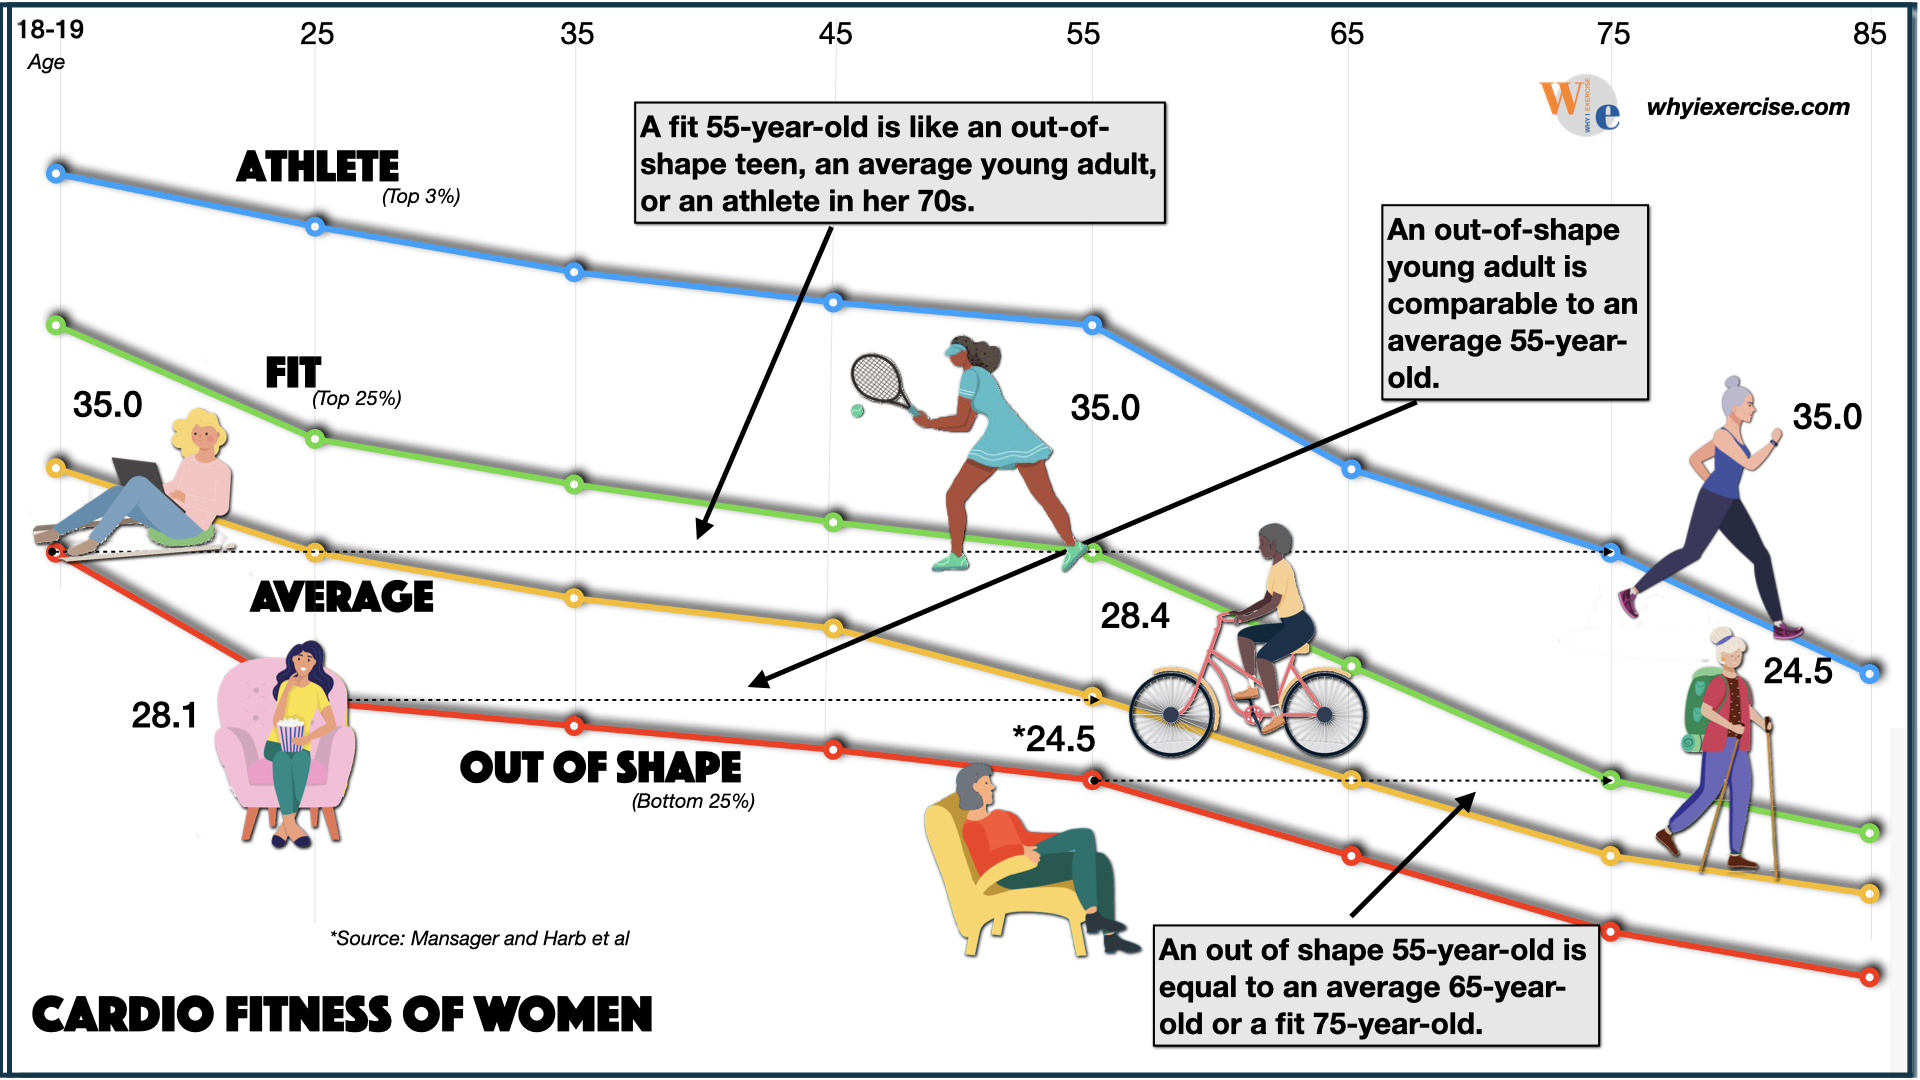 cardio fitness comparison in women age 17 to 85, fit vs. out-of-shape